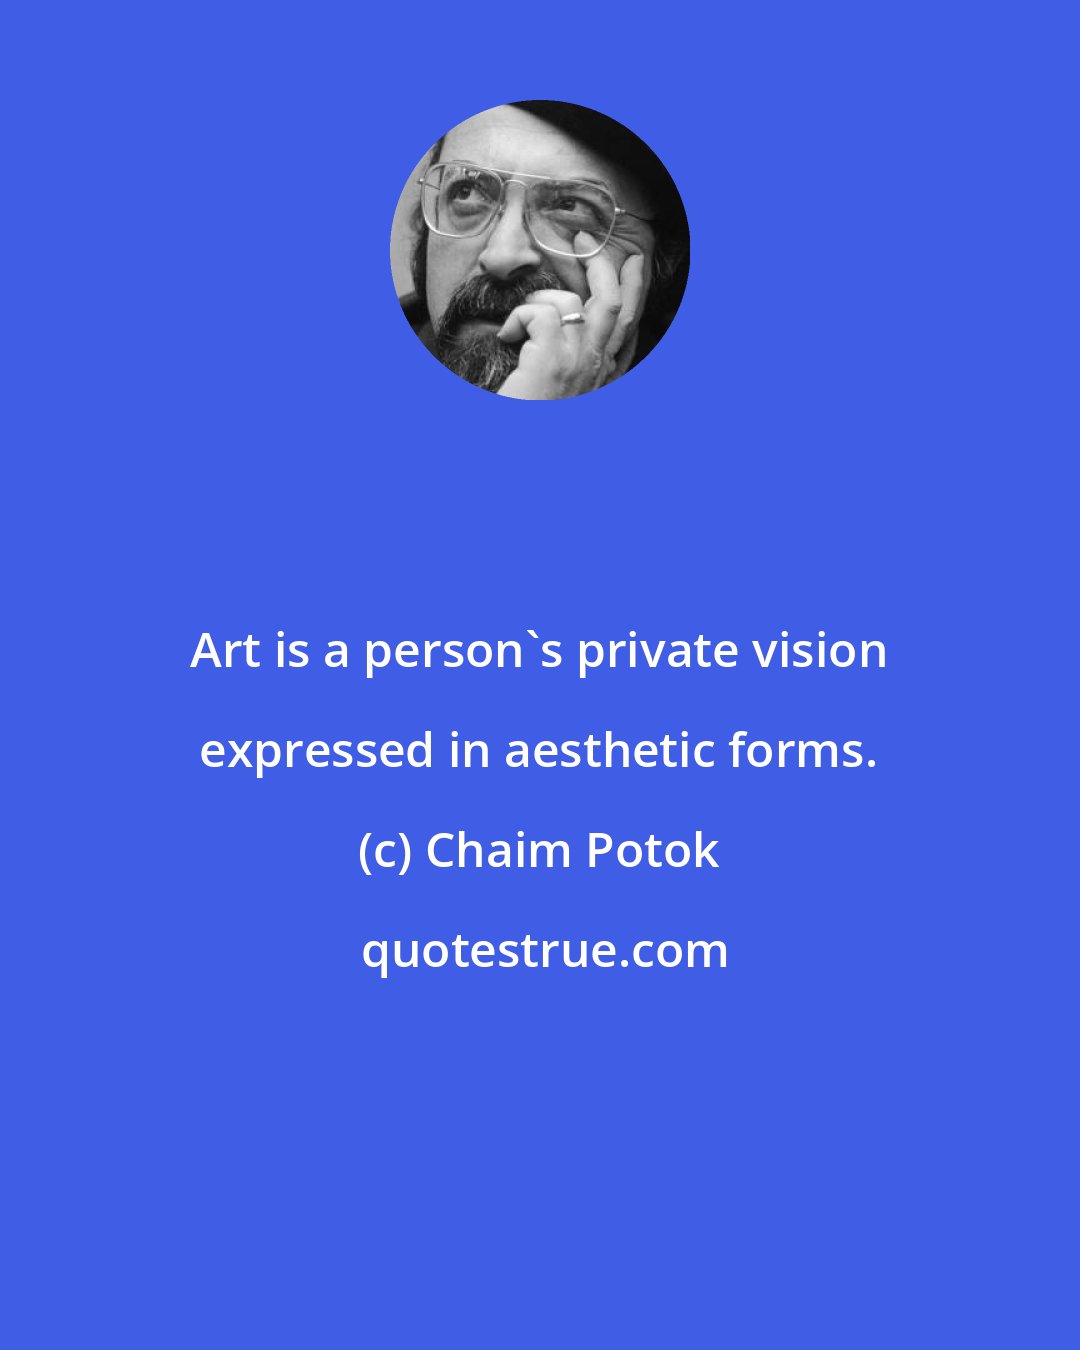 Chaim Potok: Art is a person's private vision expressed in aesthetic forms.